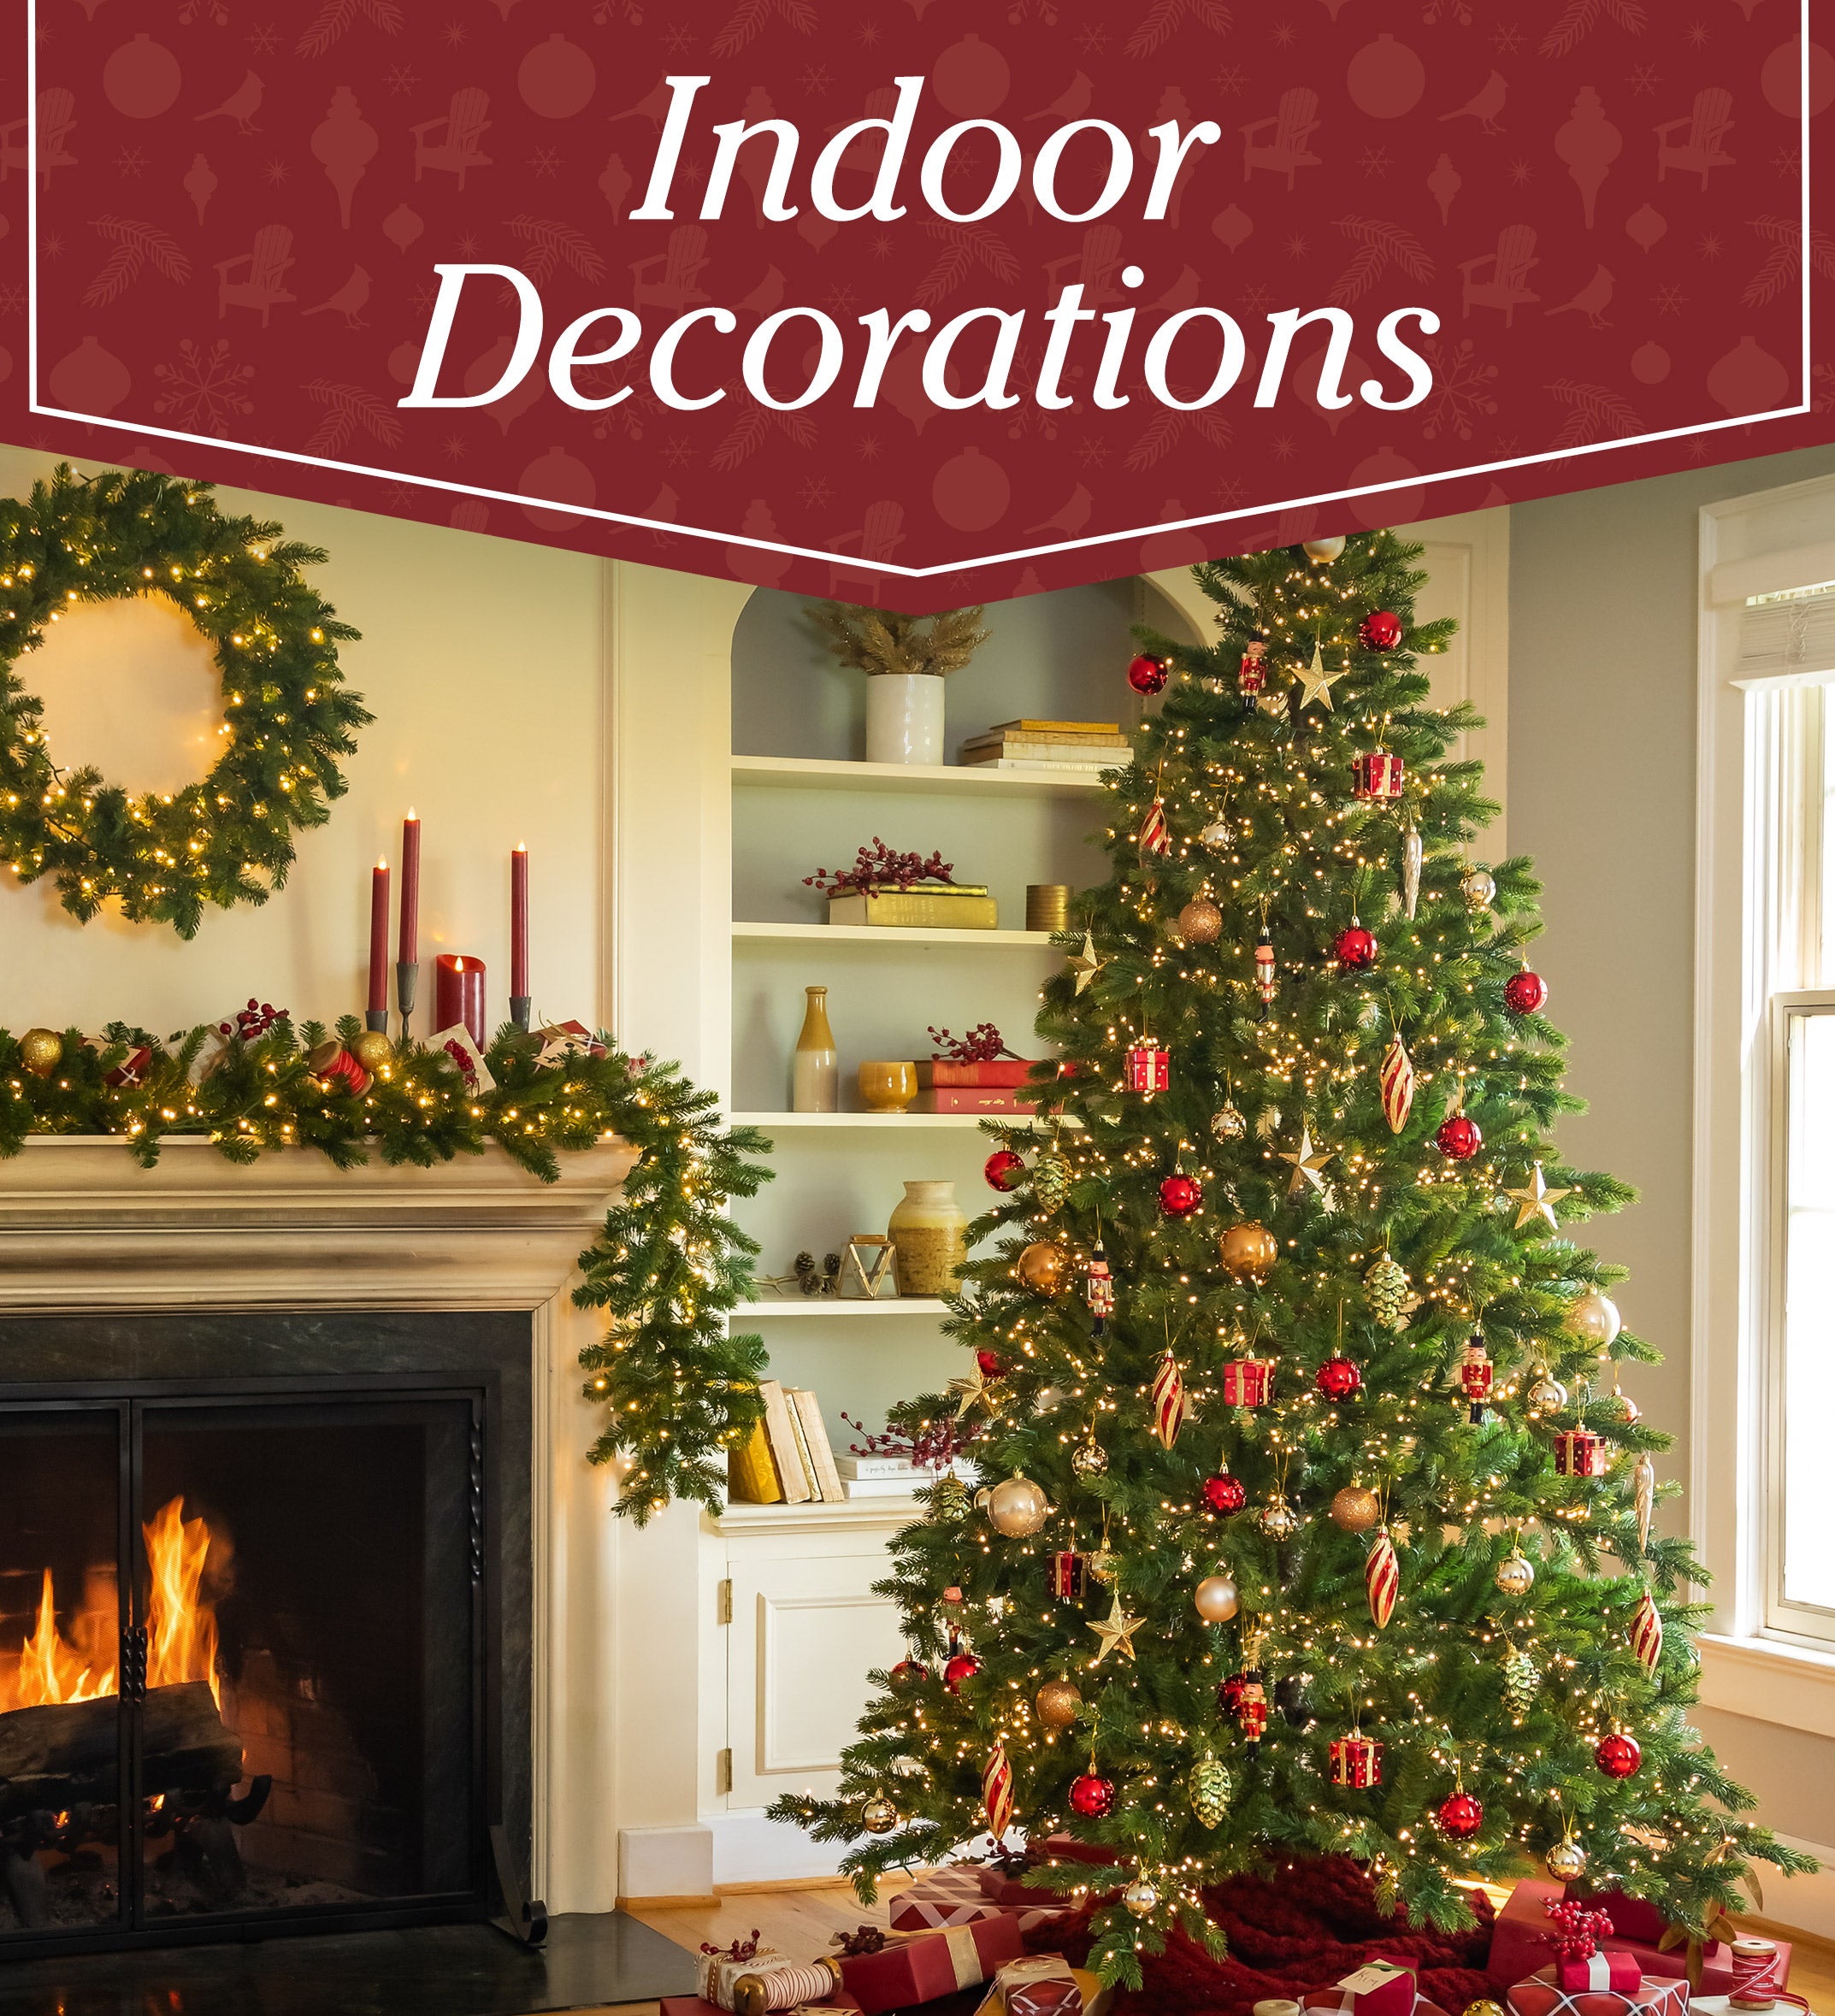 Image of Grandis Fir Christmas Tree in front of fireplace. Indoor Decorations